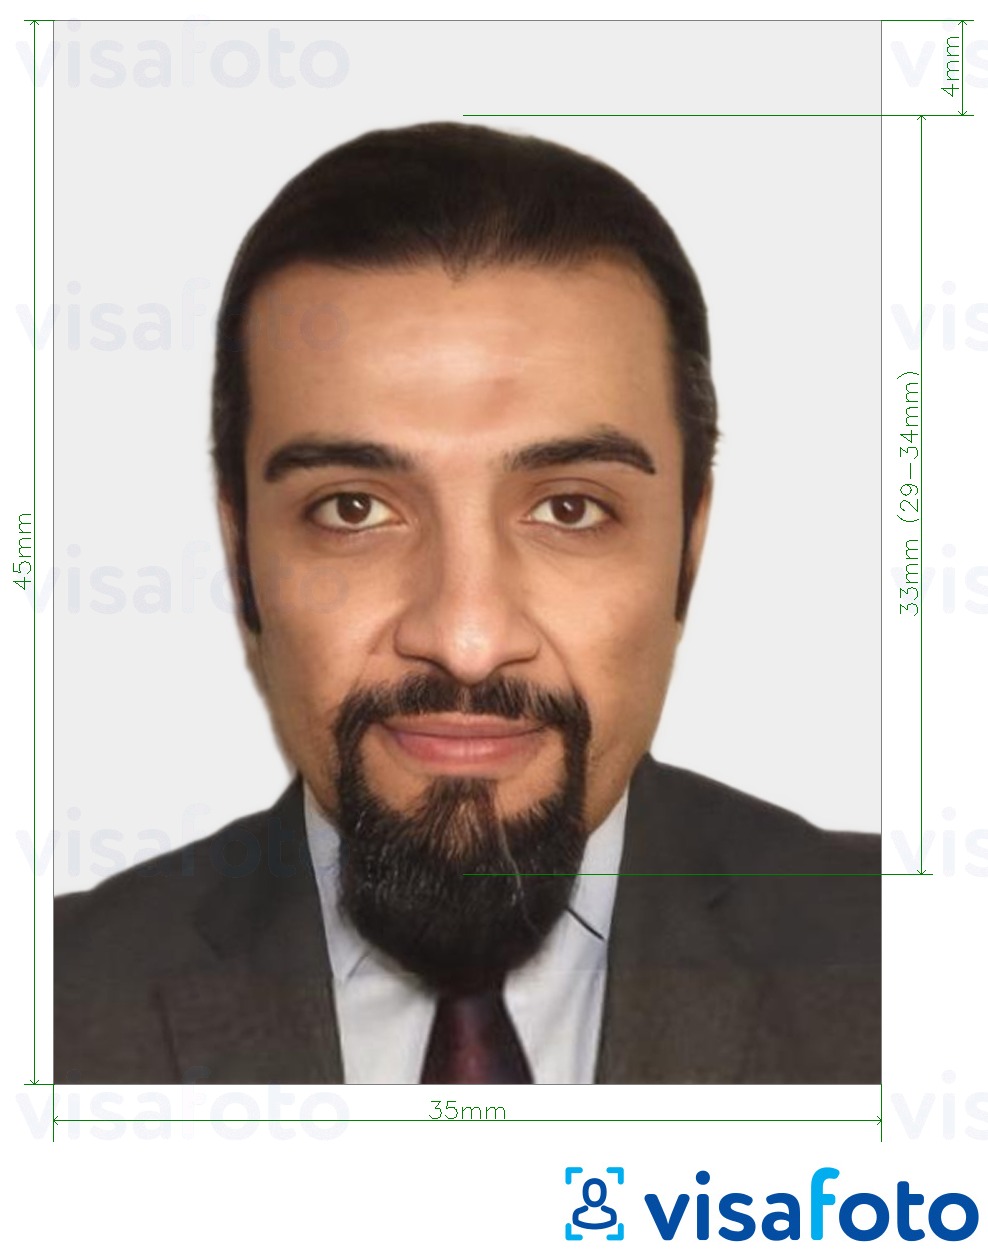 Example of photo for Morocco National ID Card 35x45 mm (3.5x4.5 cm) with exact size specification